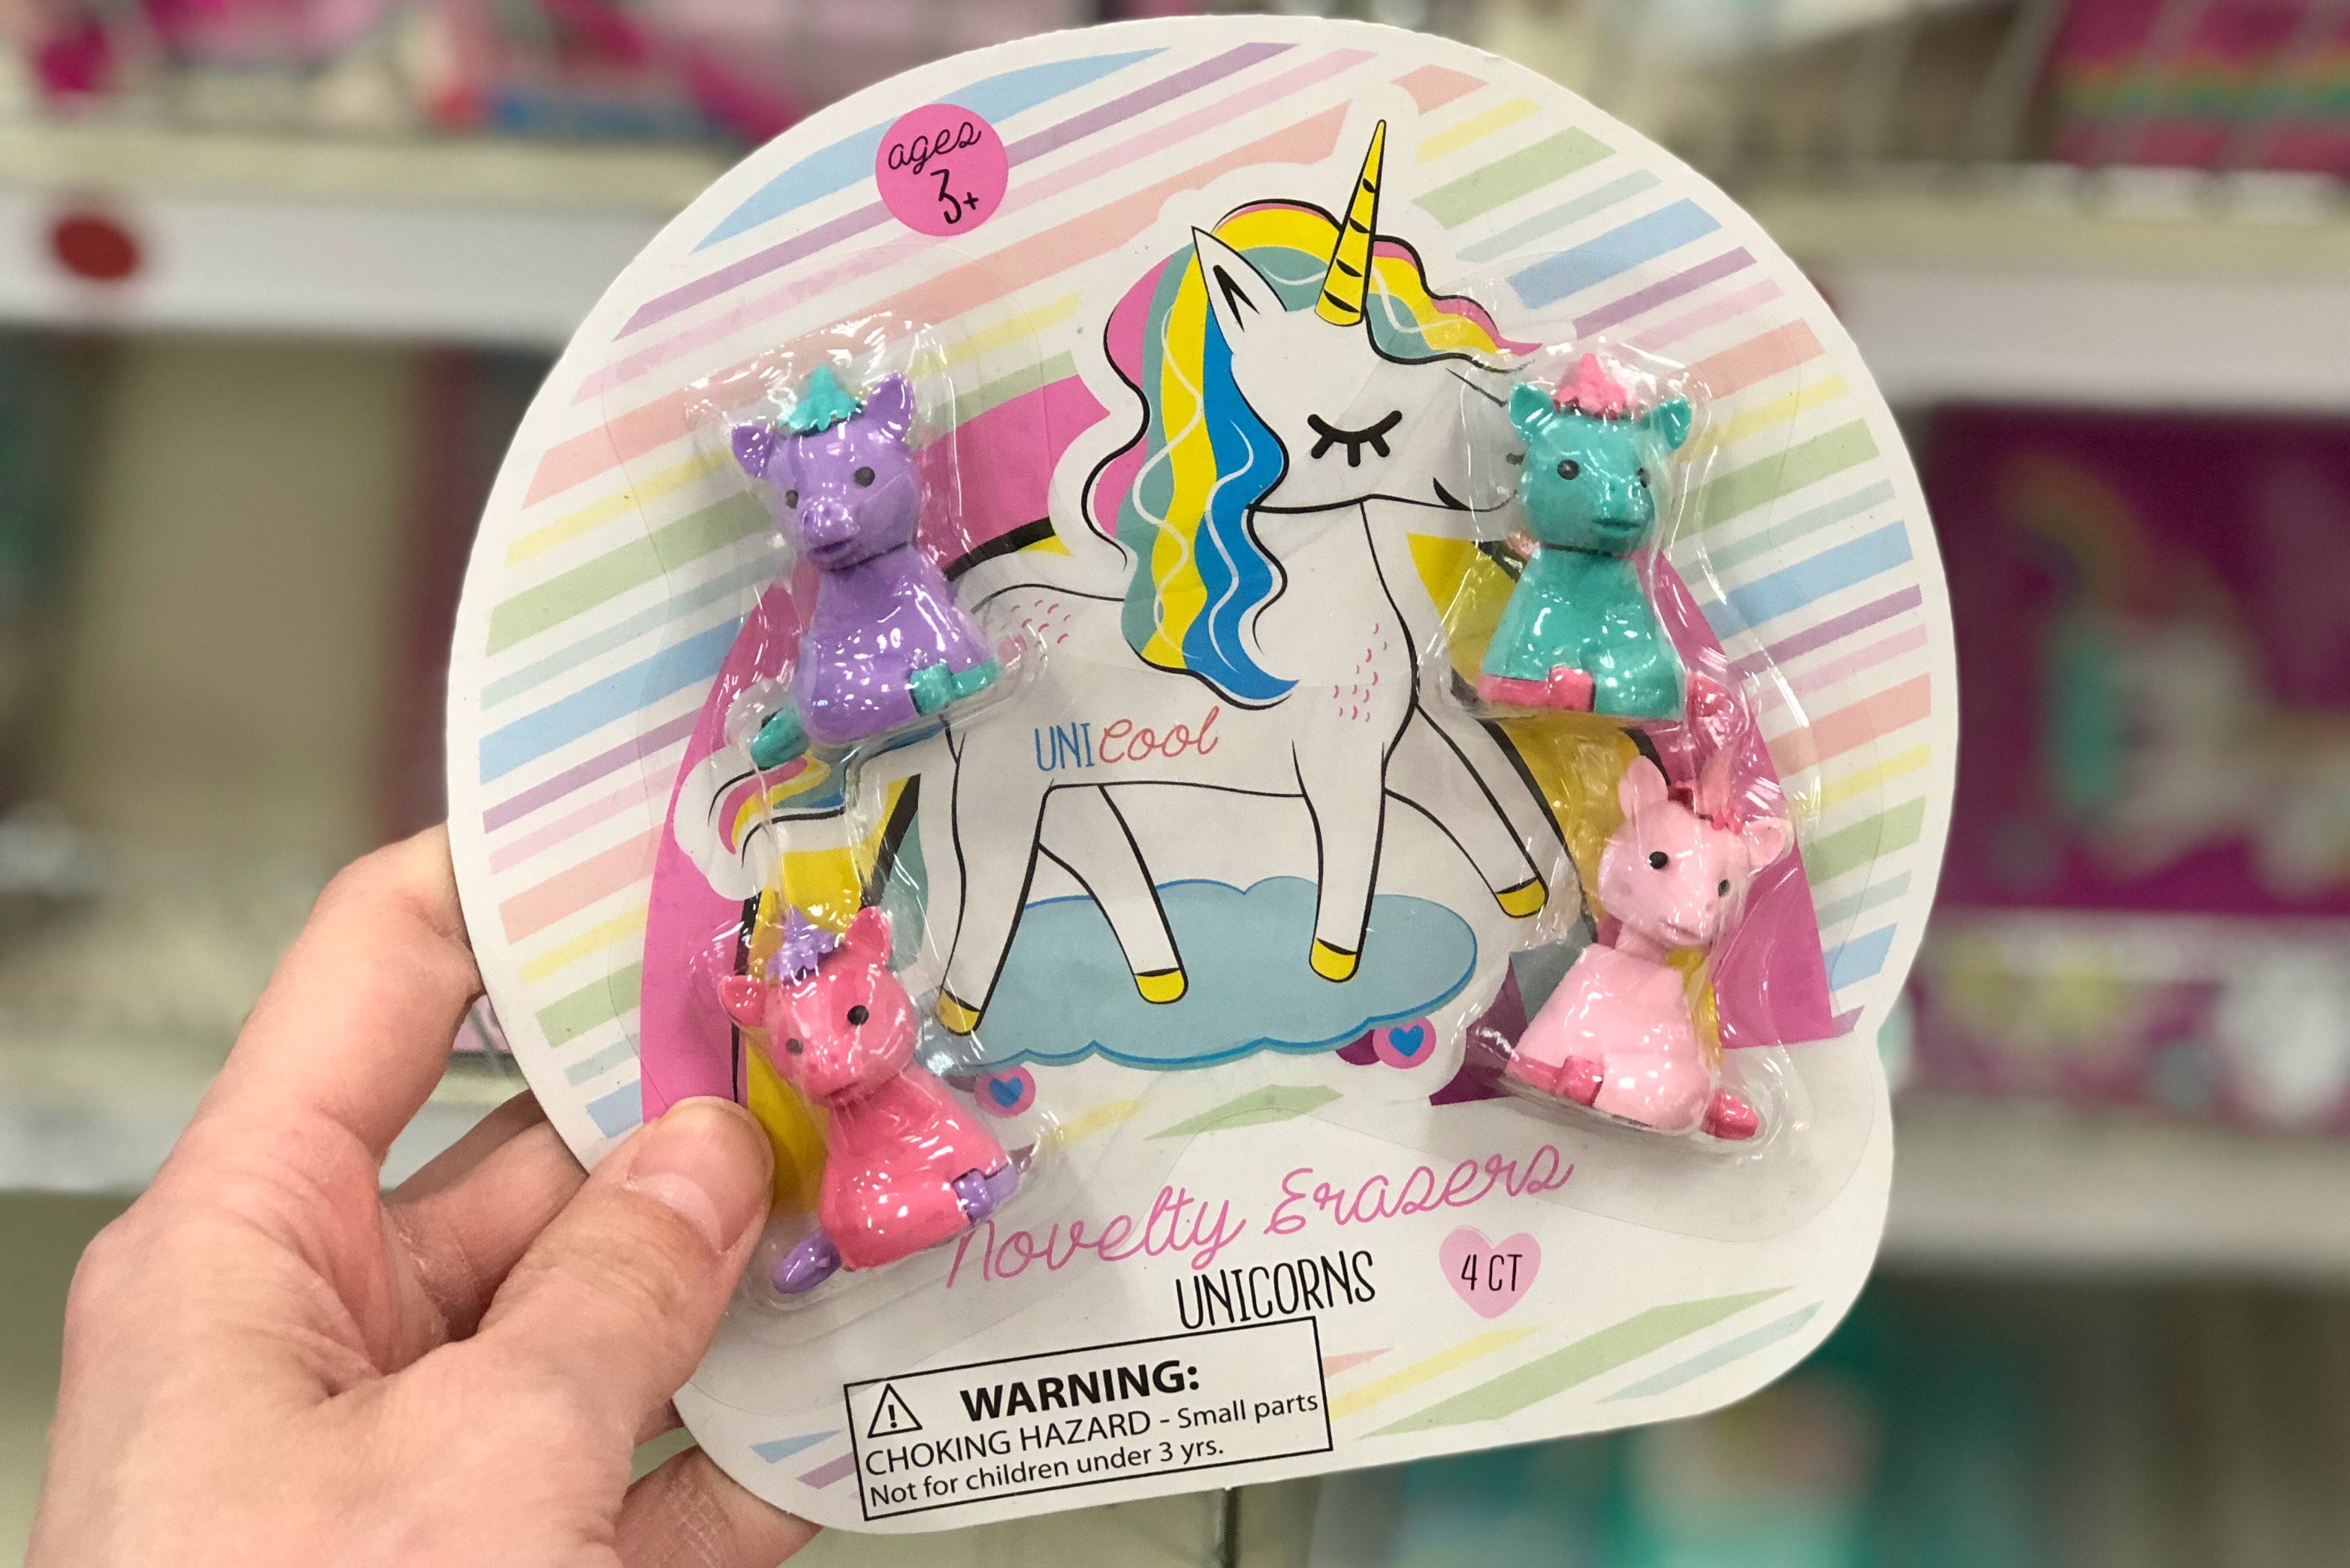 Keep Your Eyes Peeled For These Fun Unicorn Products at 